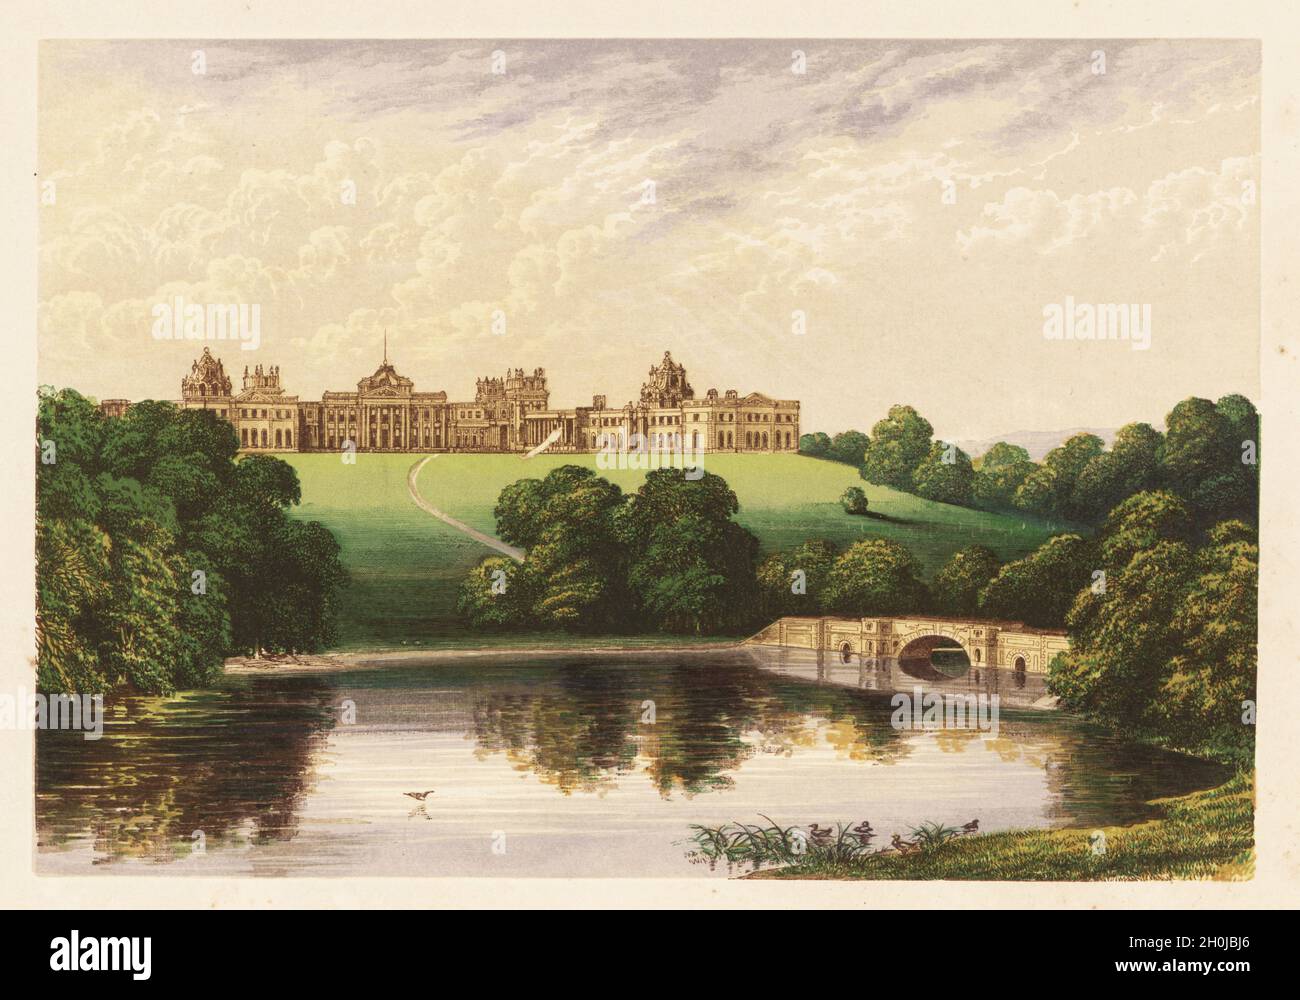 Blenheim Palace, Oxfordshire, England. English Baroque-style  palace built by Sir John Vanbrugh for John Churchill, 1st Duke of Marlborough in the early 18th century. Colour woodblock by Benjamin Fawcett in the Baxter process of an illustration by Alexander Francis Lydon from Reverend Francis Orpen Morris’s Picturesque Views of the Seats of Noblemen and Gentlemen of Great Britain and Ireland, William Mackenzie, London, 1880. Stock Photo